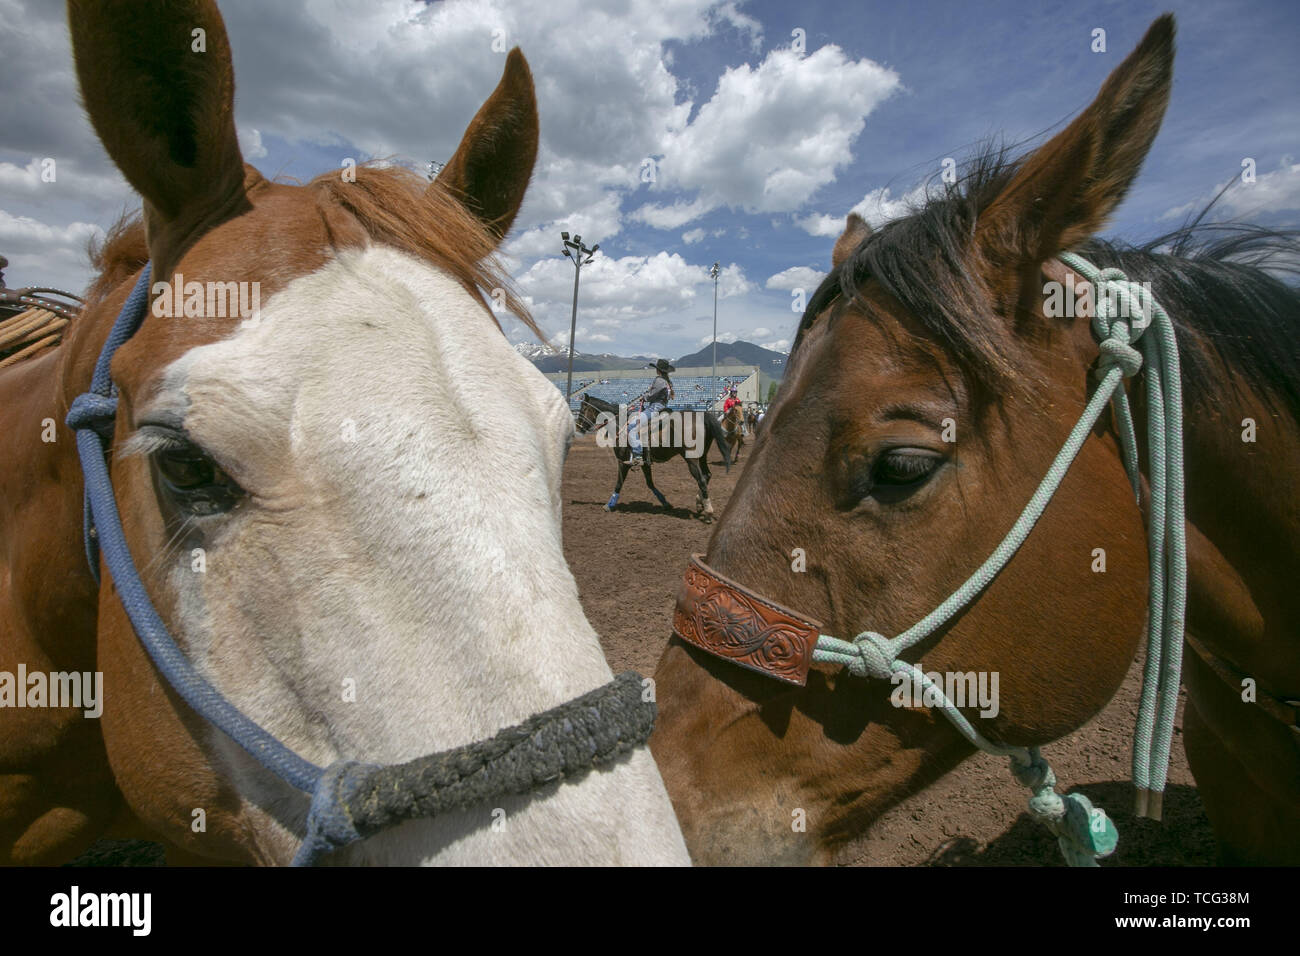 Heber City, Utah, USA. 6th June, 2019. Students on horseback warm up before taking part in the pole bending event at the Utah High School Rodeo Association Finals in Heber City Utah, June 7, 2019. Students from across the state of Utah gathered to compete in Barrel Racing, Pole Bending, Goat Tying, Breakaway Roping, Cow Cutting, Bull Riding, Bareback Riding, Saddle Bronc Riding, Tie Down Roping, Steer Wrestling, and Team Roping. Credit: Natalie Behring/ZUMA Wire/Alamy Live News Stock Photo